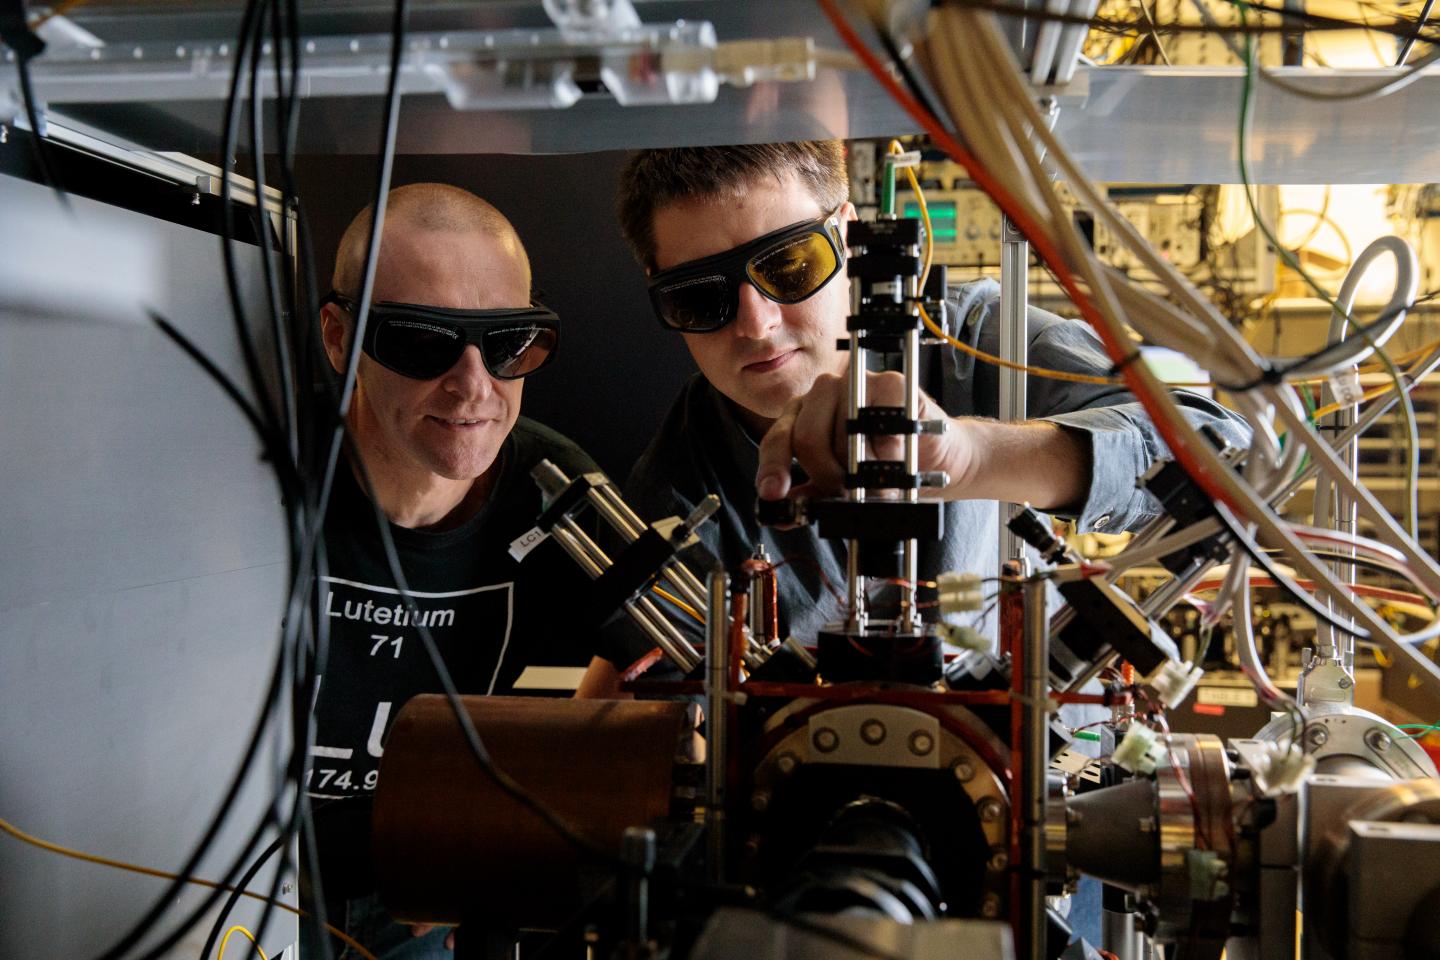 Researchers at the Centre for Quantum Technologies at the National University of Singapore are building a first-of-its-kind atomic clock using the element lutetium